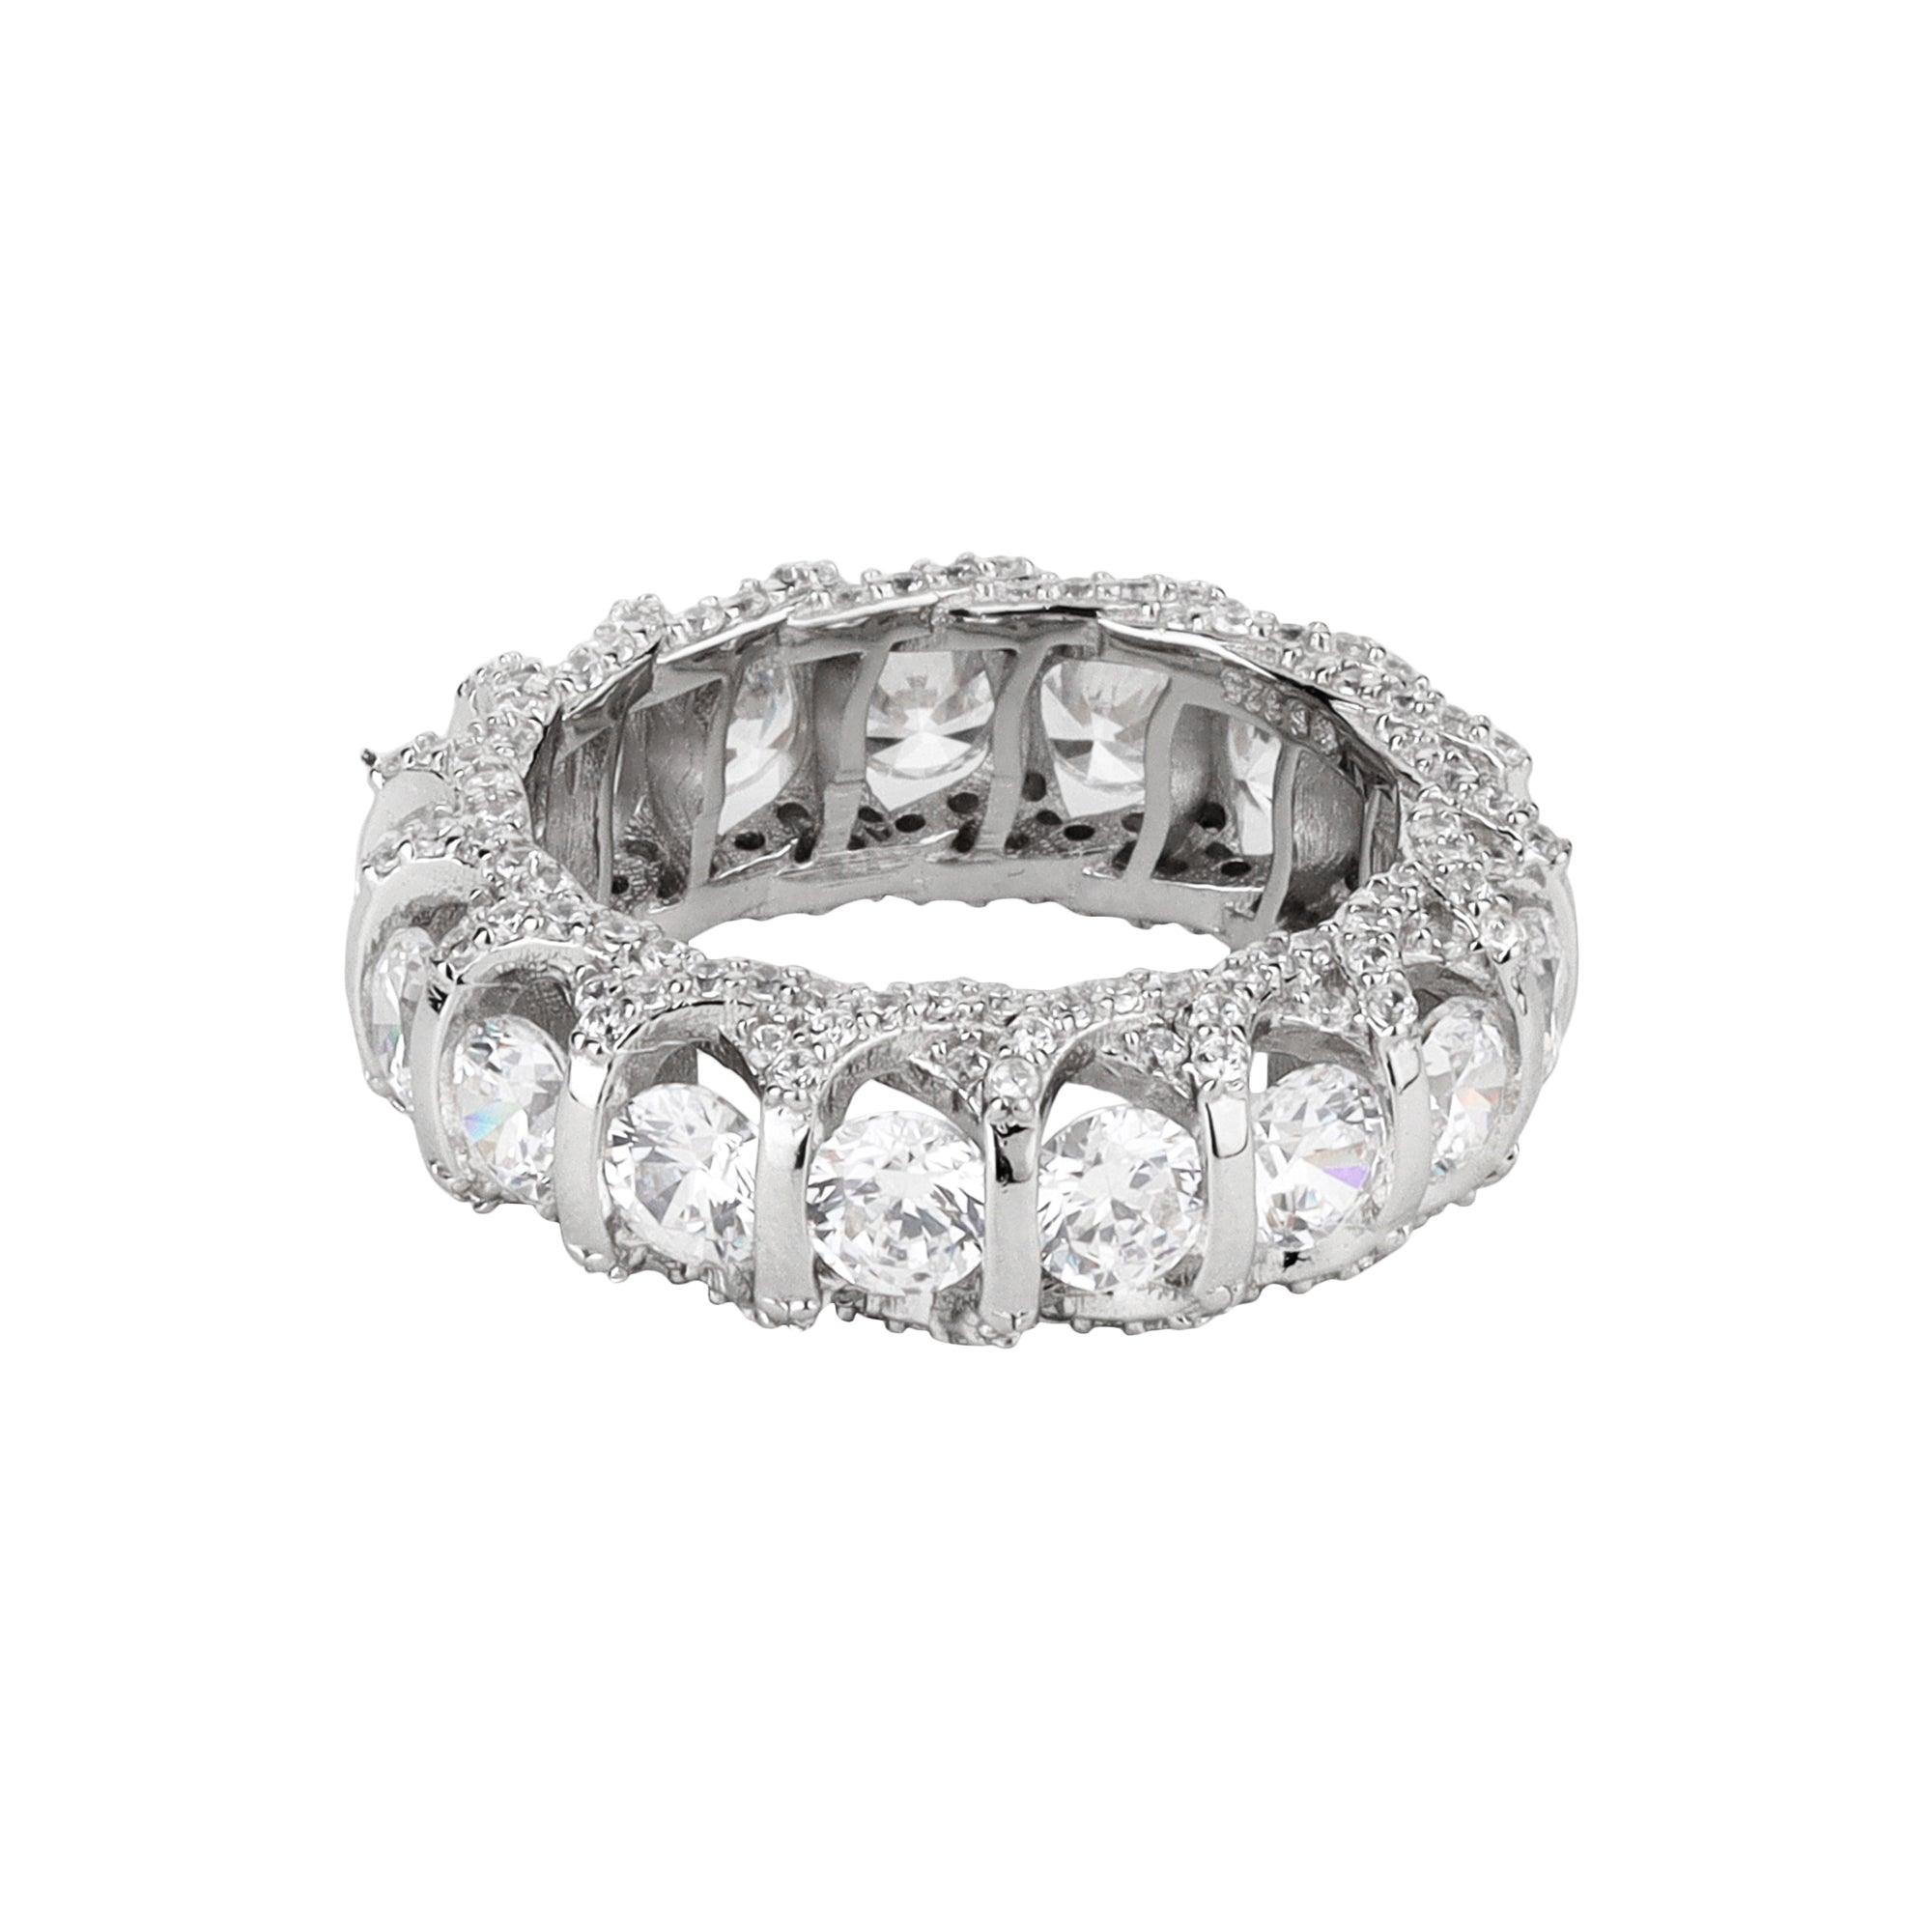 Silvermark Sparkling Eternity Ring with Round Shaped Stones - silvermark